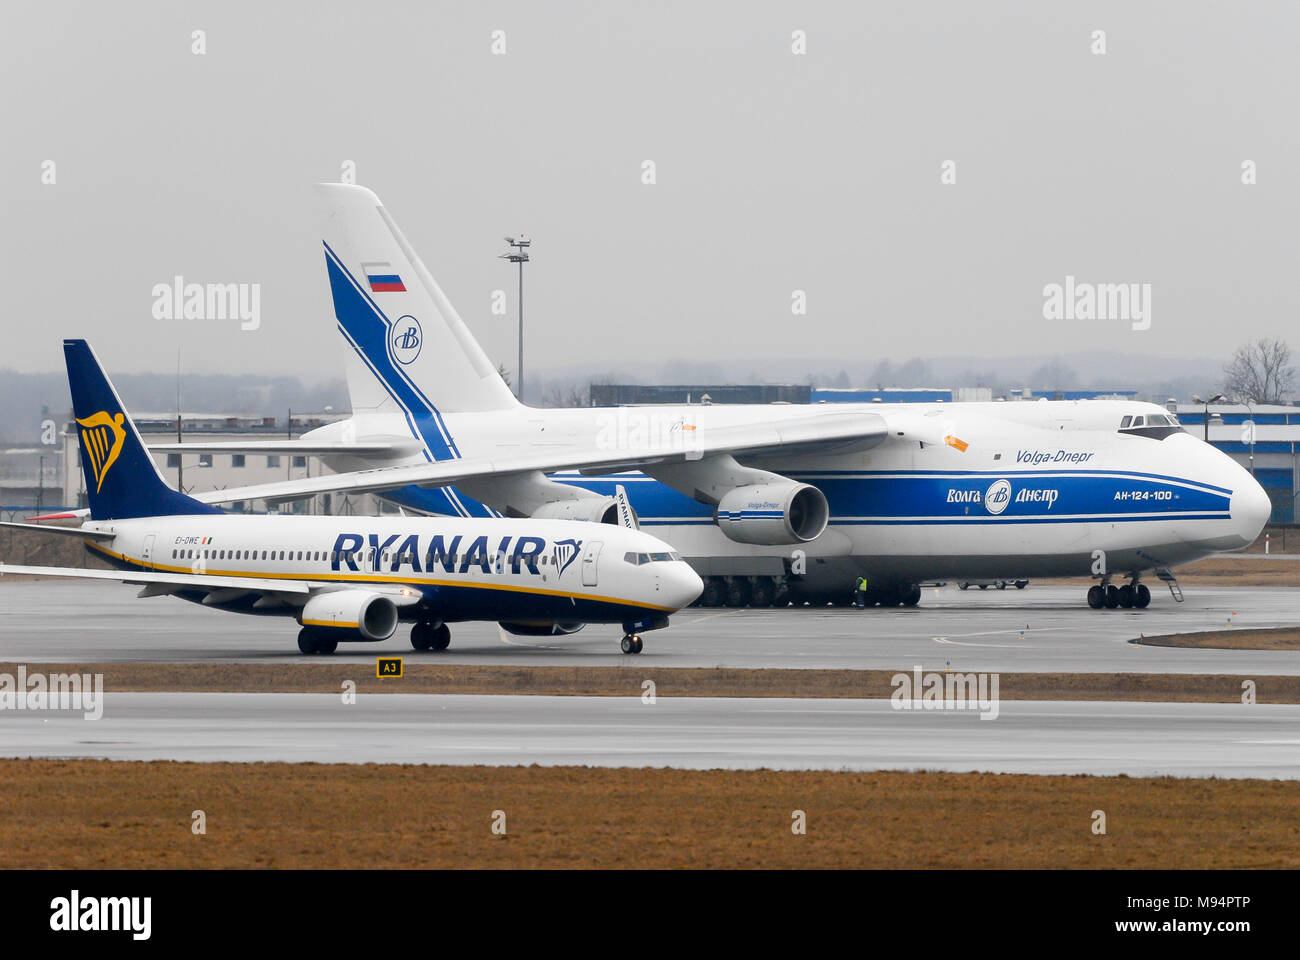 Gdansk, Poland. 22nd Mar, 2018. Russian strategic airlift jet aircraft Antonov An-124-100 Ruslan owned by Volga-Dnepr Airlines and low cost airline Ryanair aircraft Boeing 737-800 in Gdansk Lech Walesa Airport in Gdansk, Poland. March 22nd 2018 © Wojciech Strozyk / Alamy Live News Stock Photo